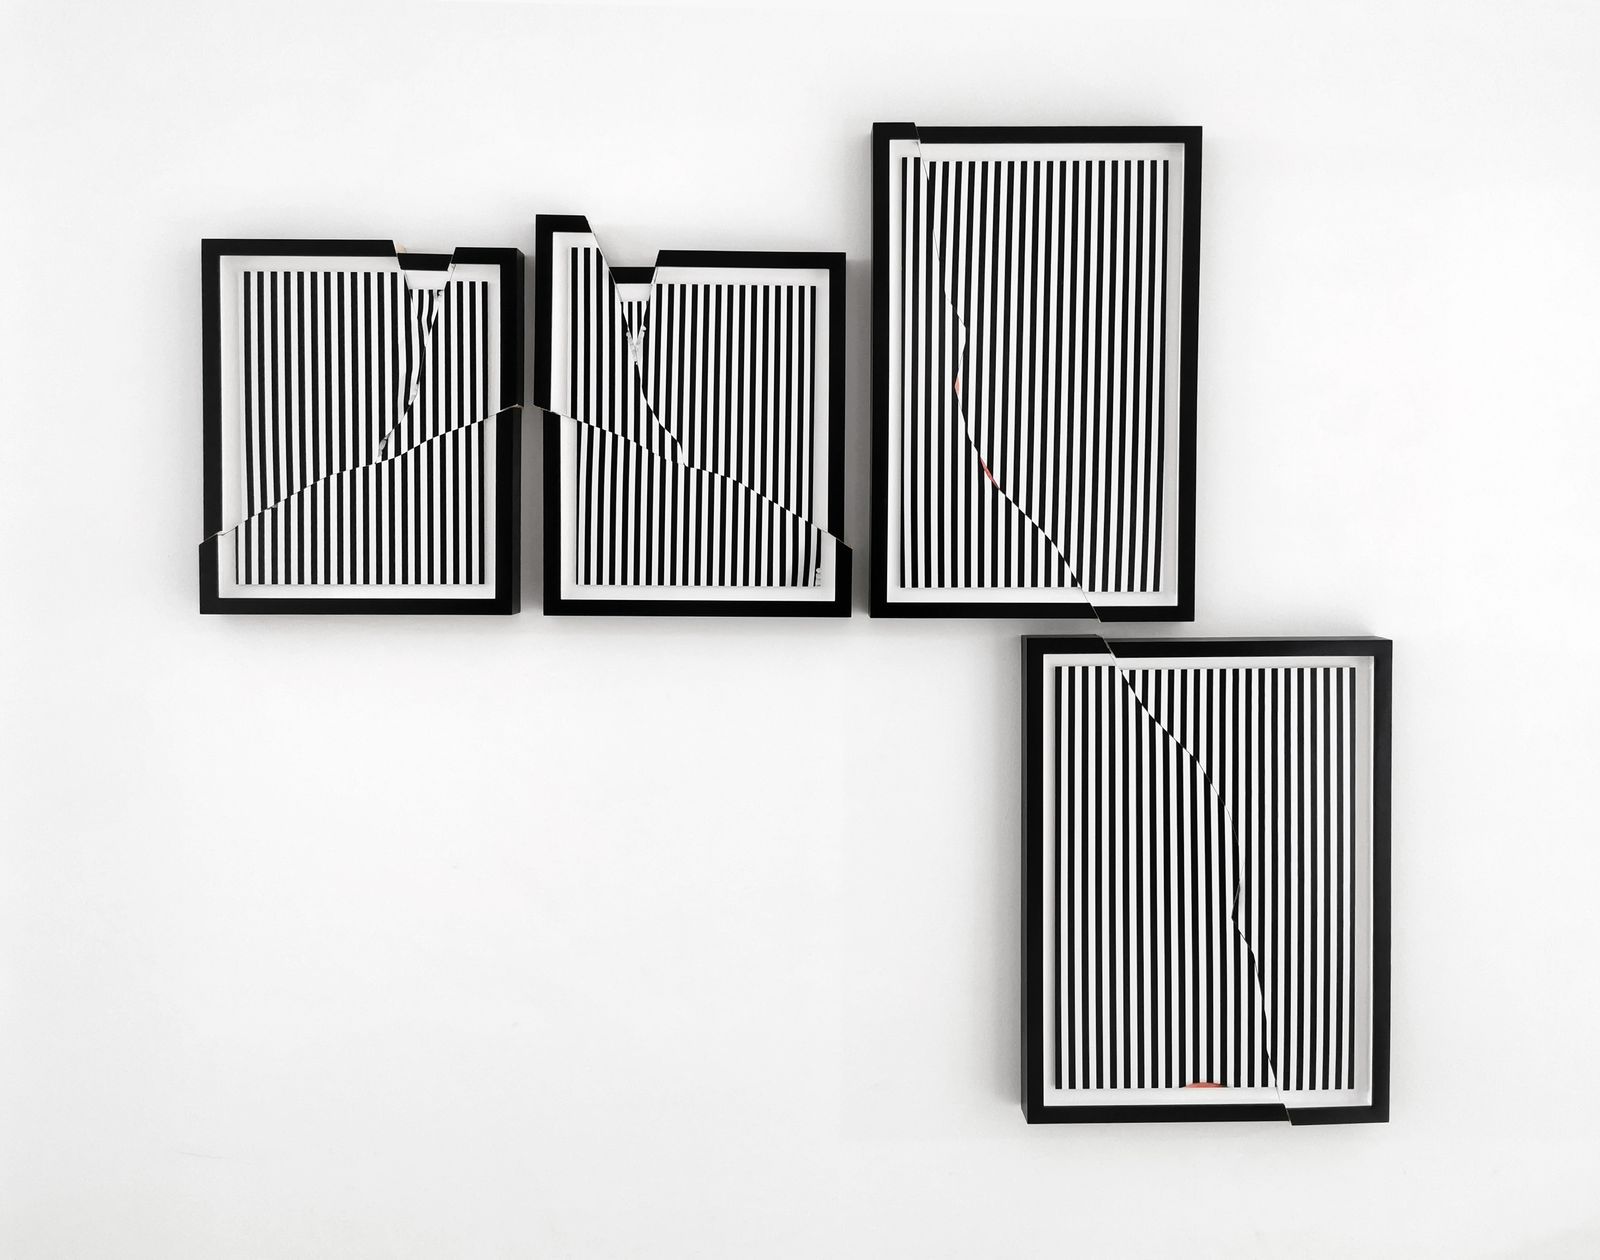 © Jonny Briggs - Gag i & Gag ii diptychs (my mouth holding B&W stripes) aluminium mounted photos, in cut wood frames, as if shattered